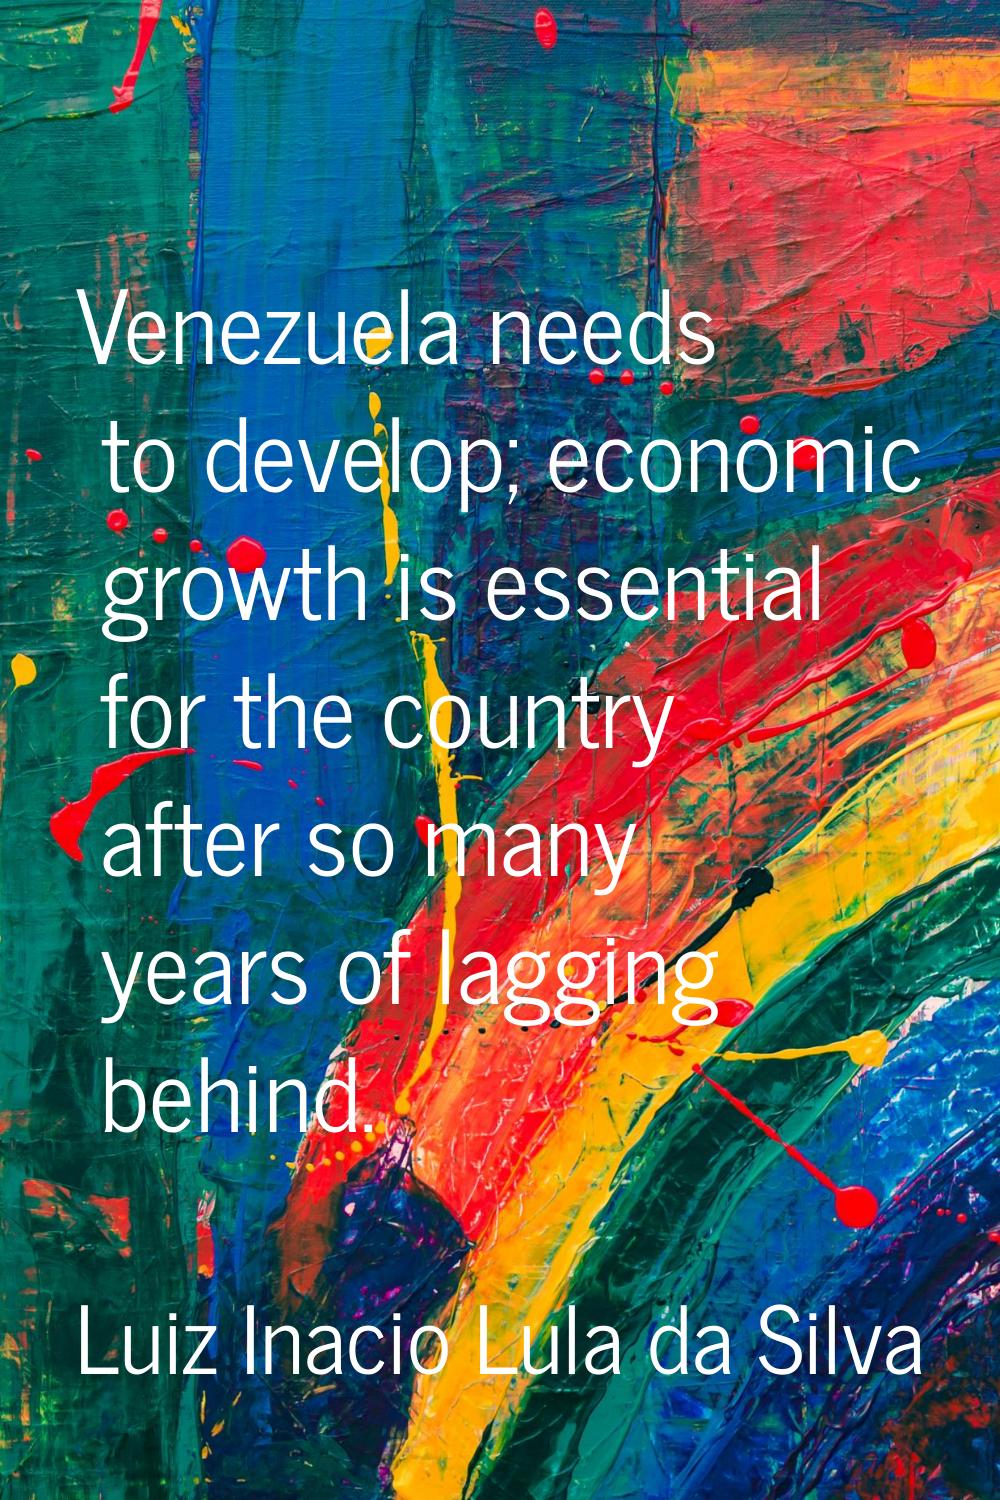 Venezuela needs to develop; economic growth is essential for the country after so many years of lag